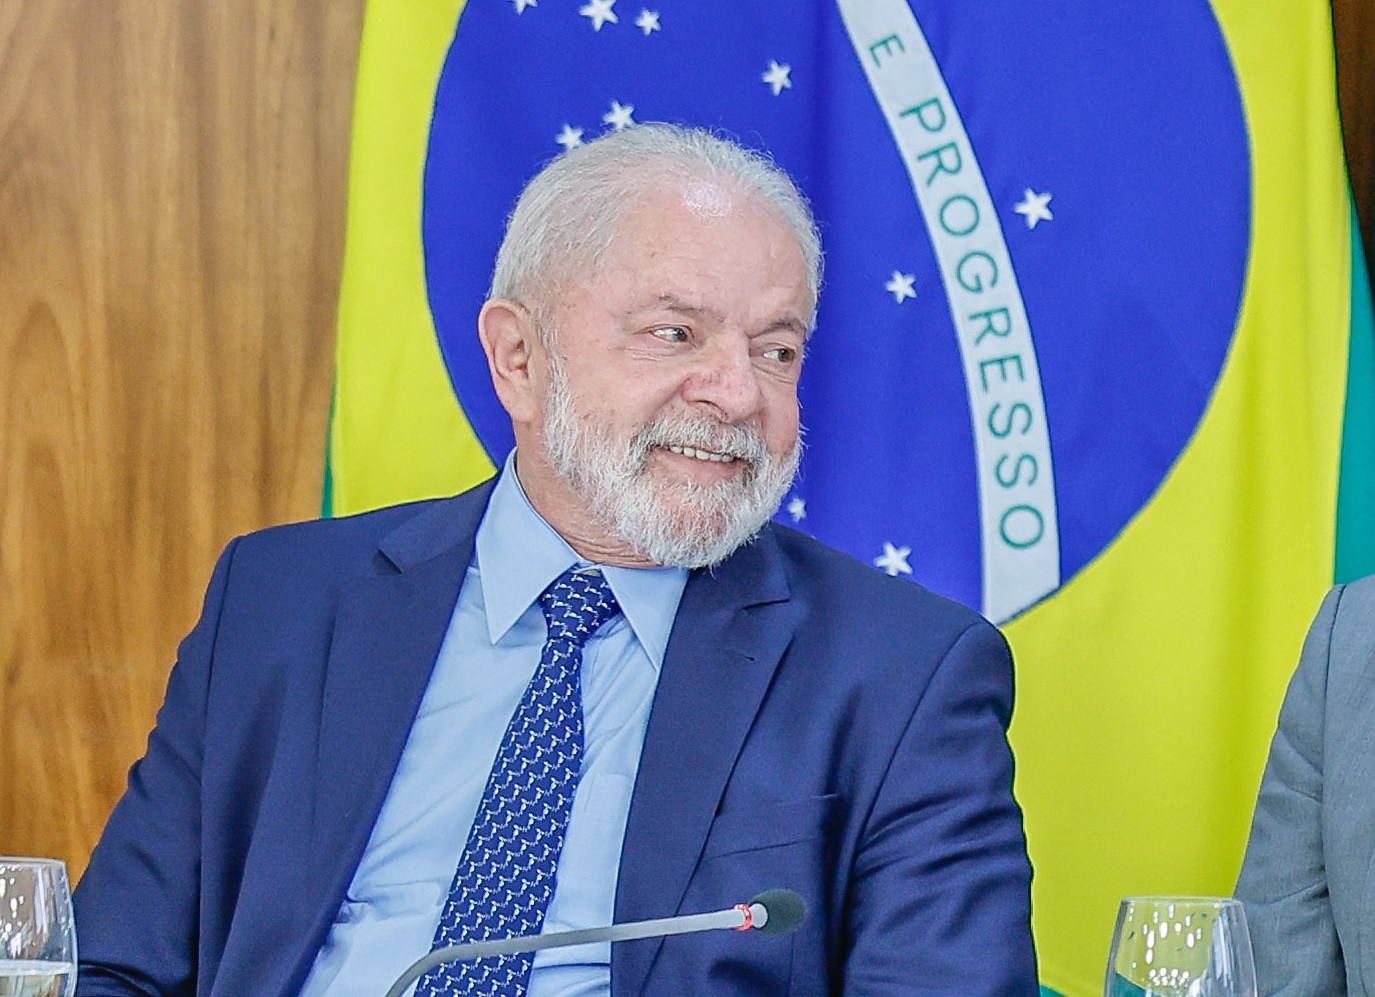 Brazil’s Lula to go to UAE following visit to China